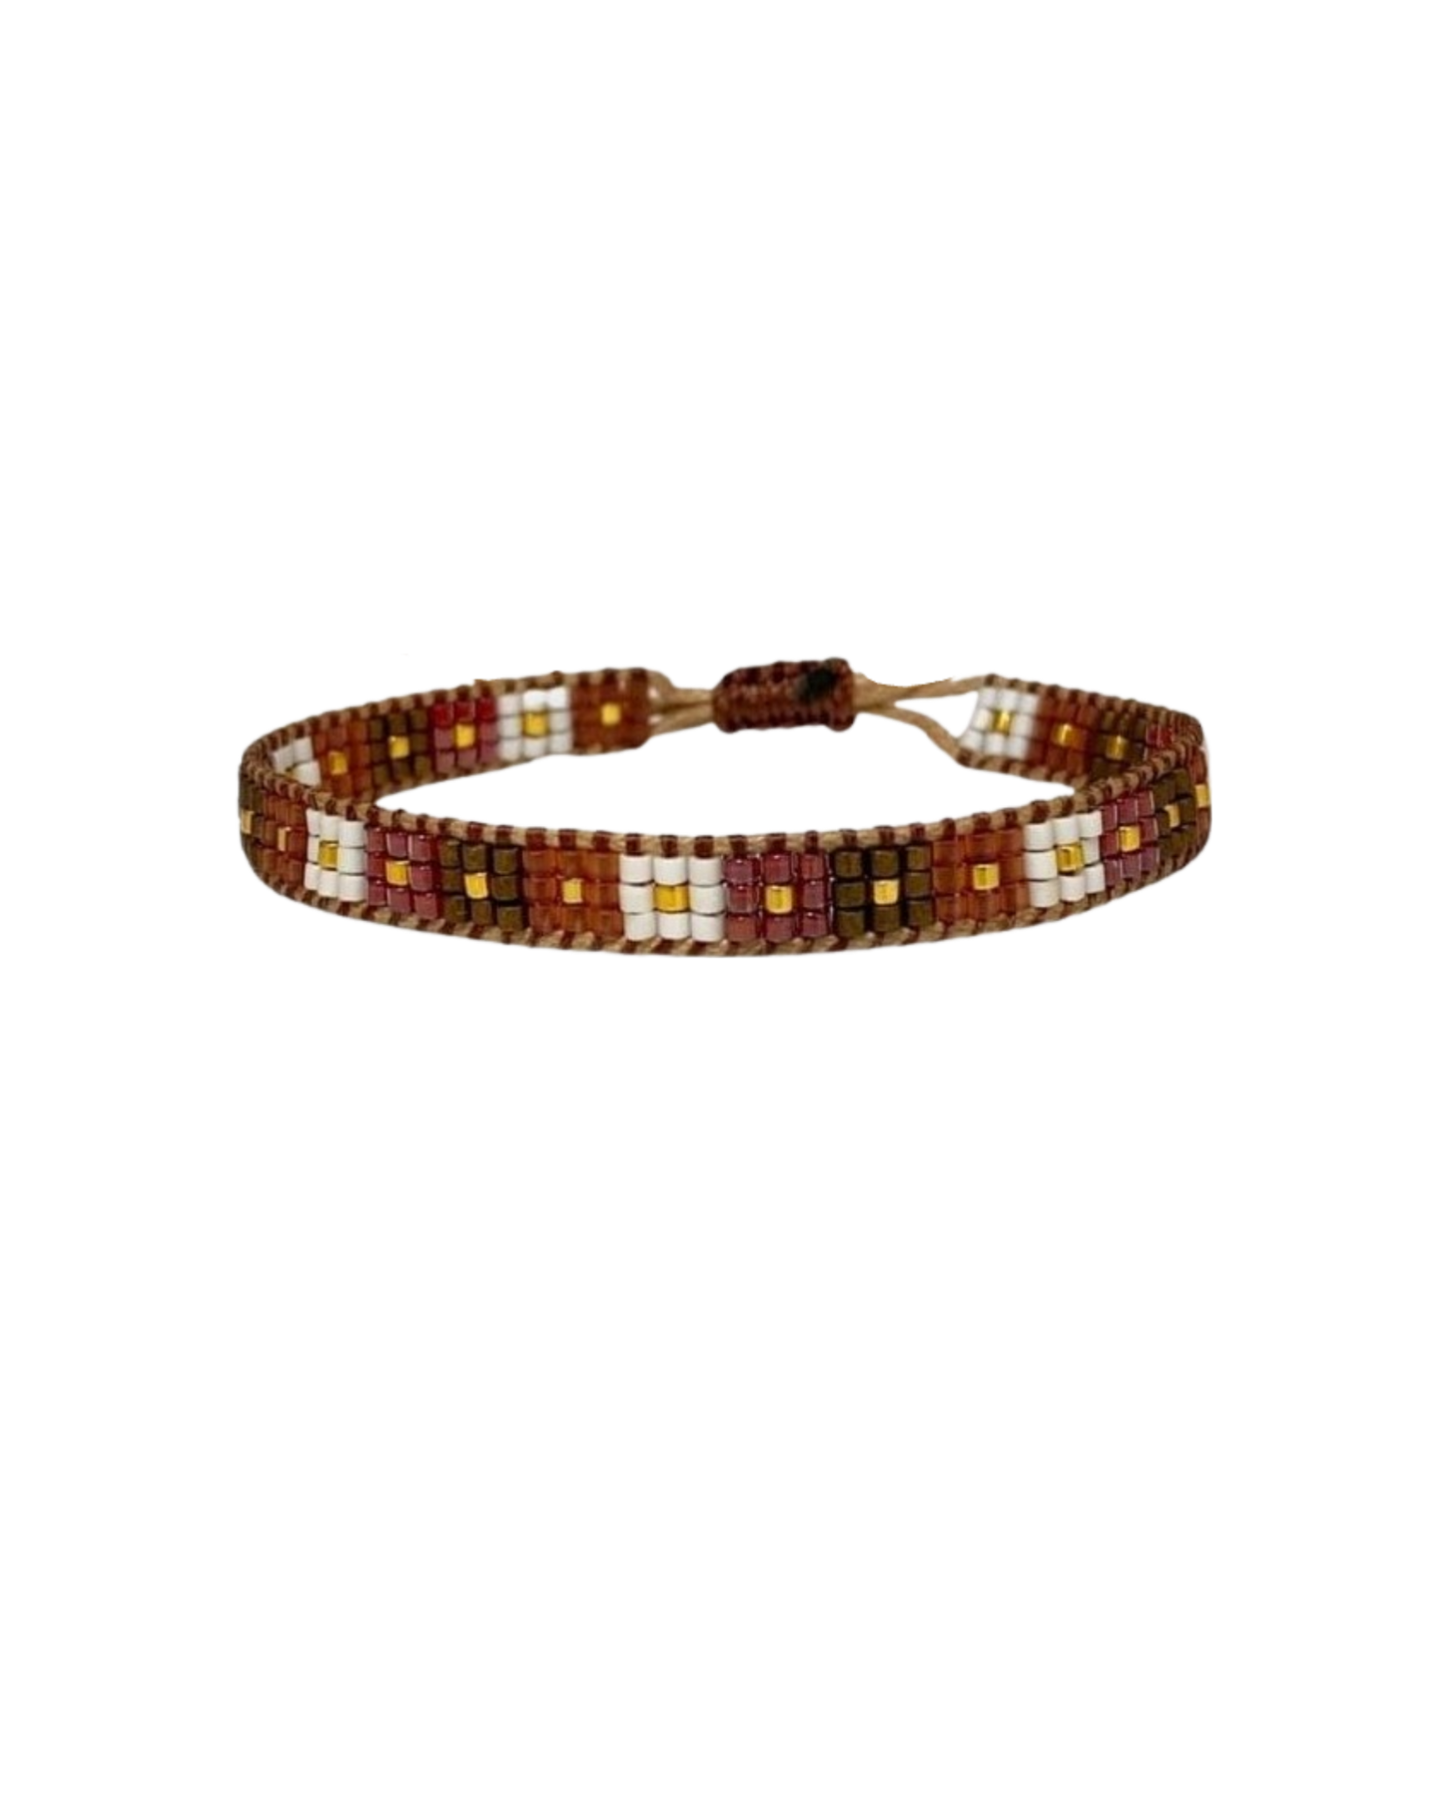 beaded-bracelet with checkered design in brown colors